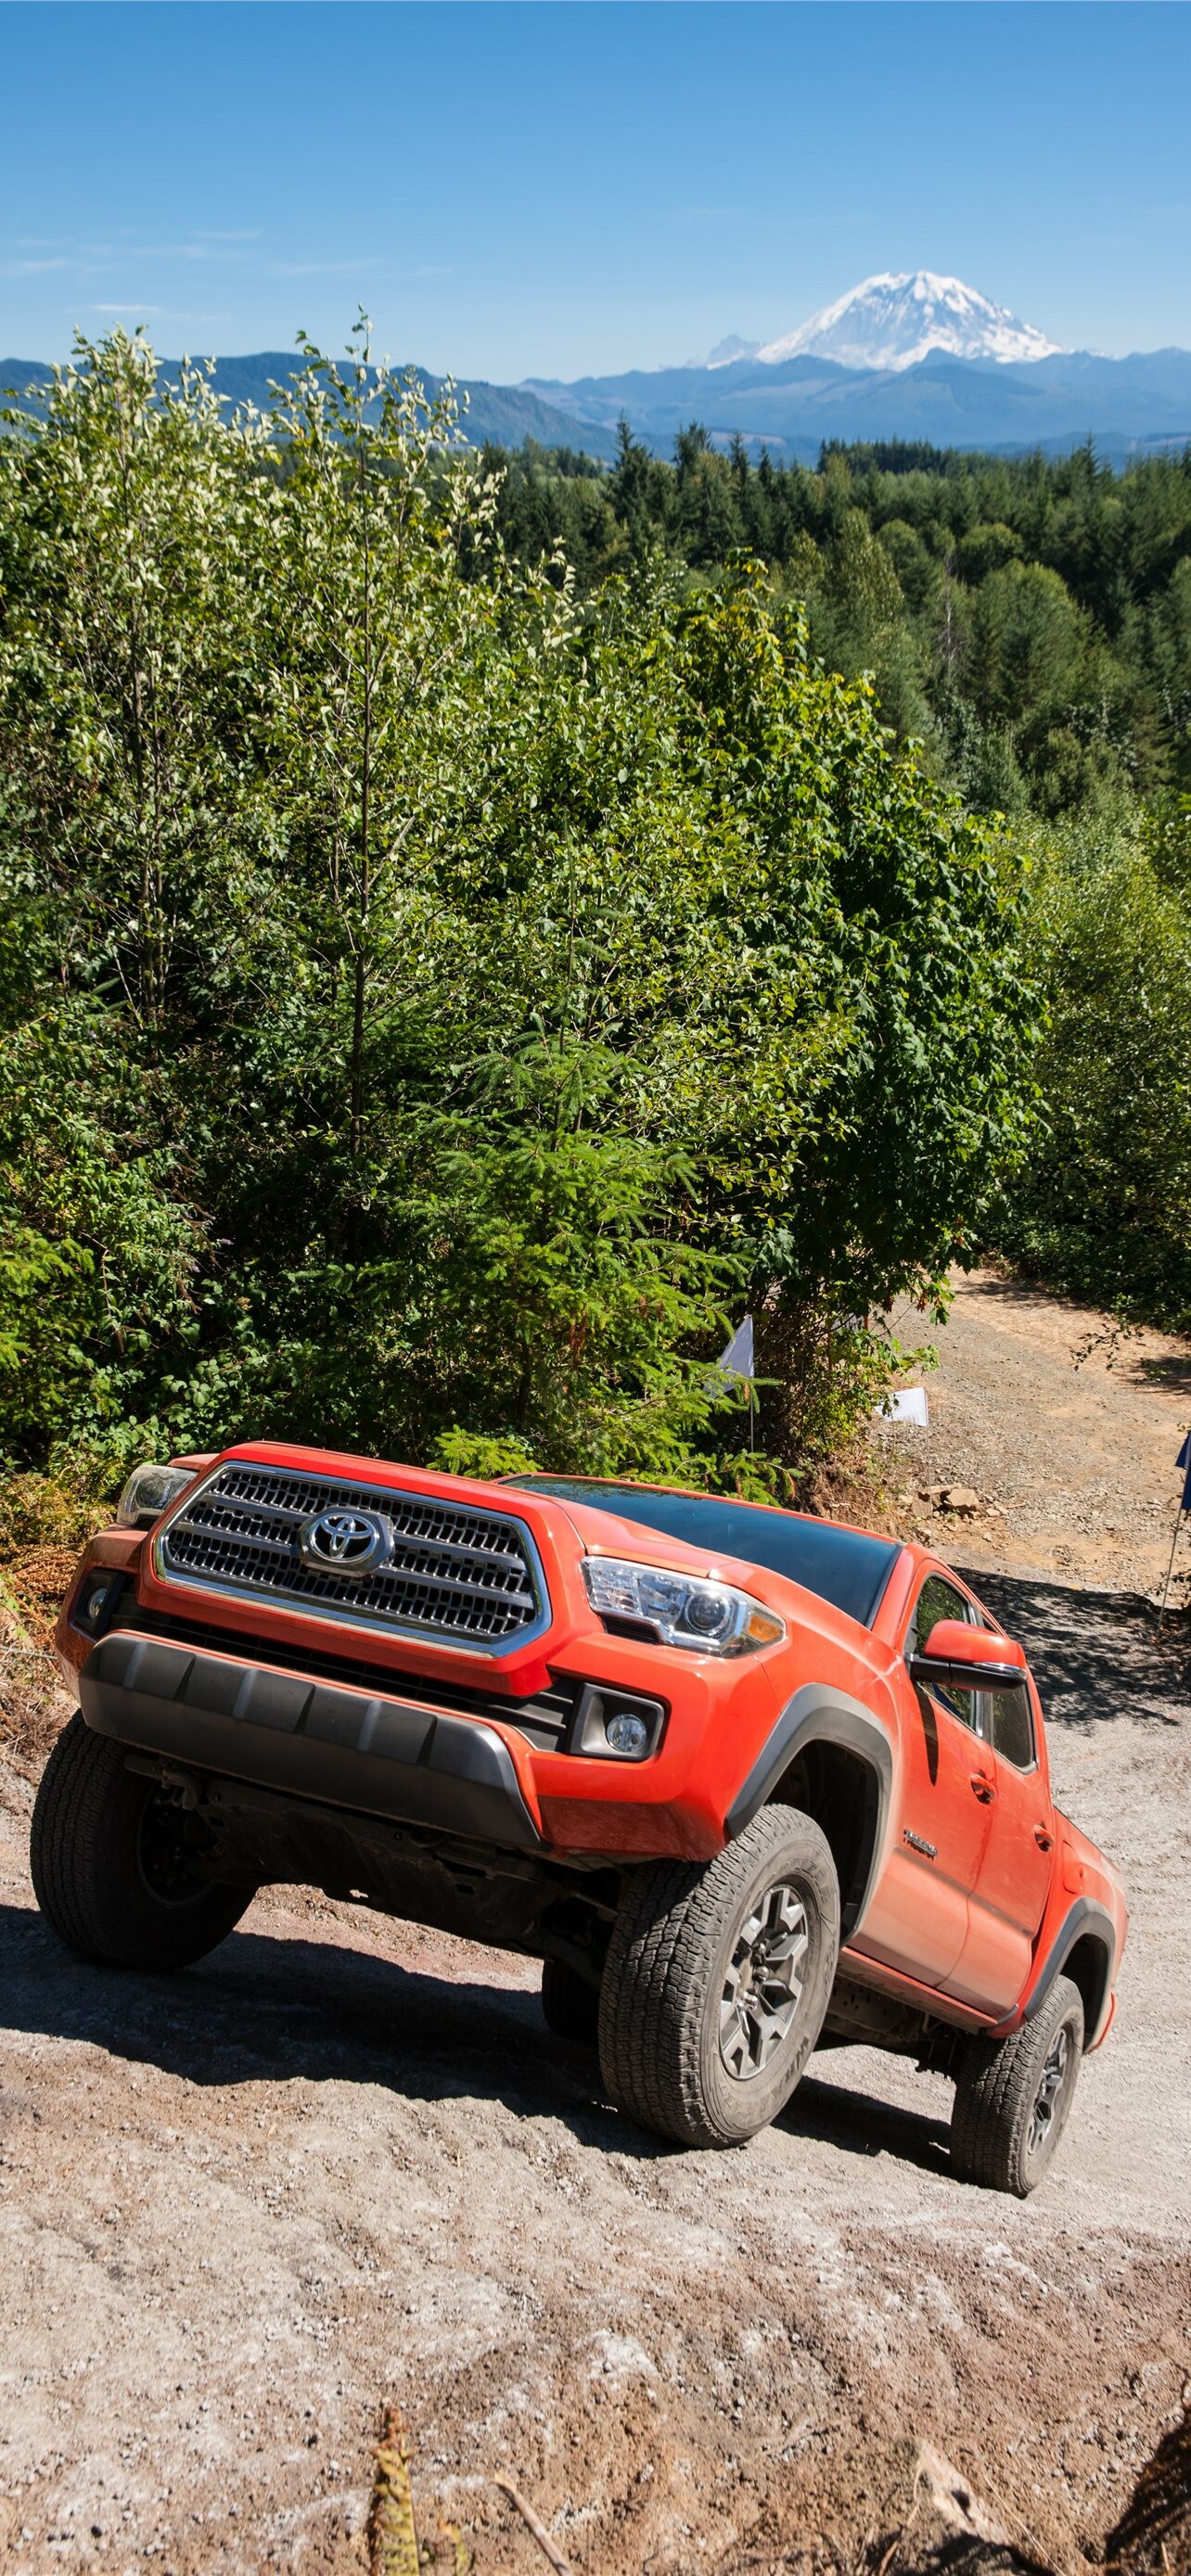 Toyota Tacoma: The model was given the IIHS's Top Safety Pick award in 2009. 1290x2780 HD Wallpaper.